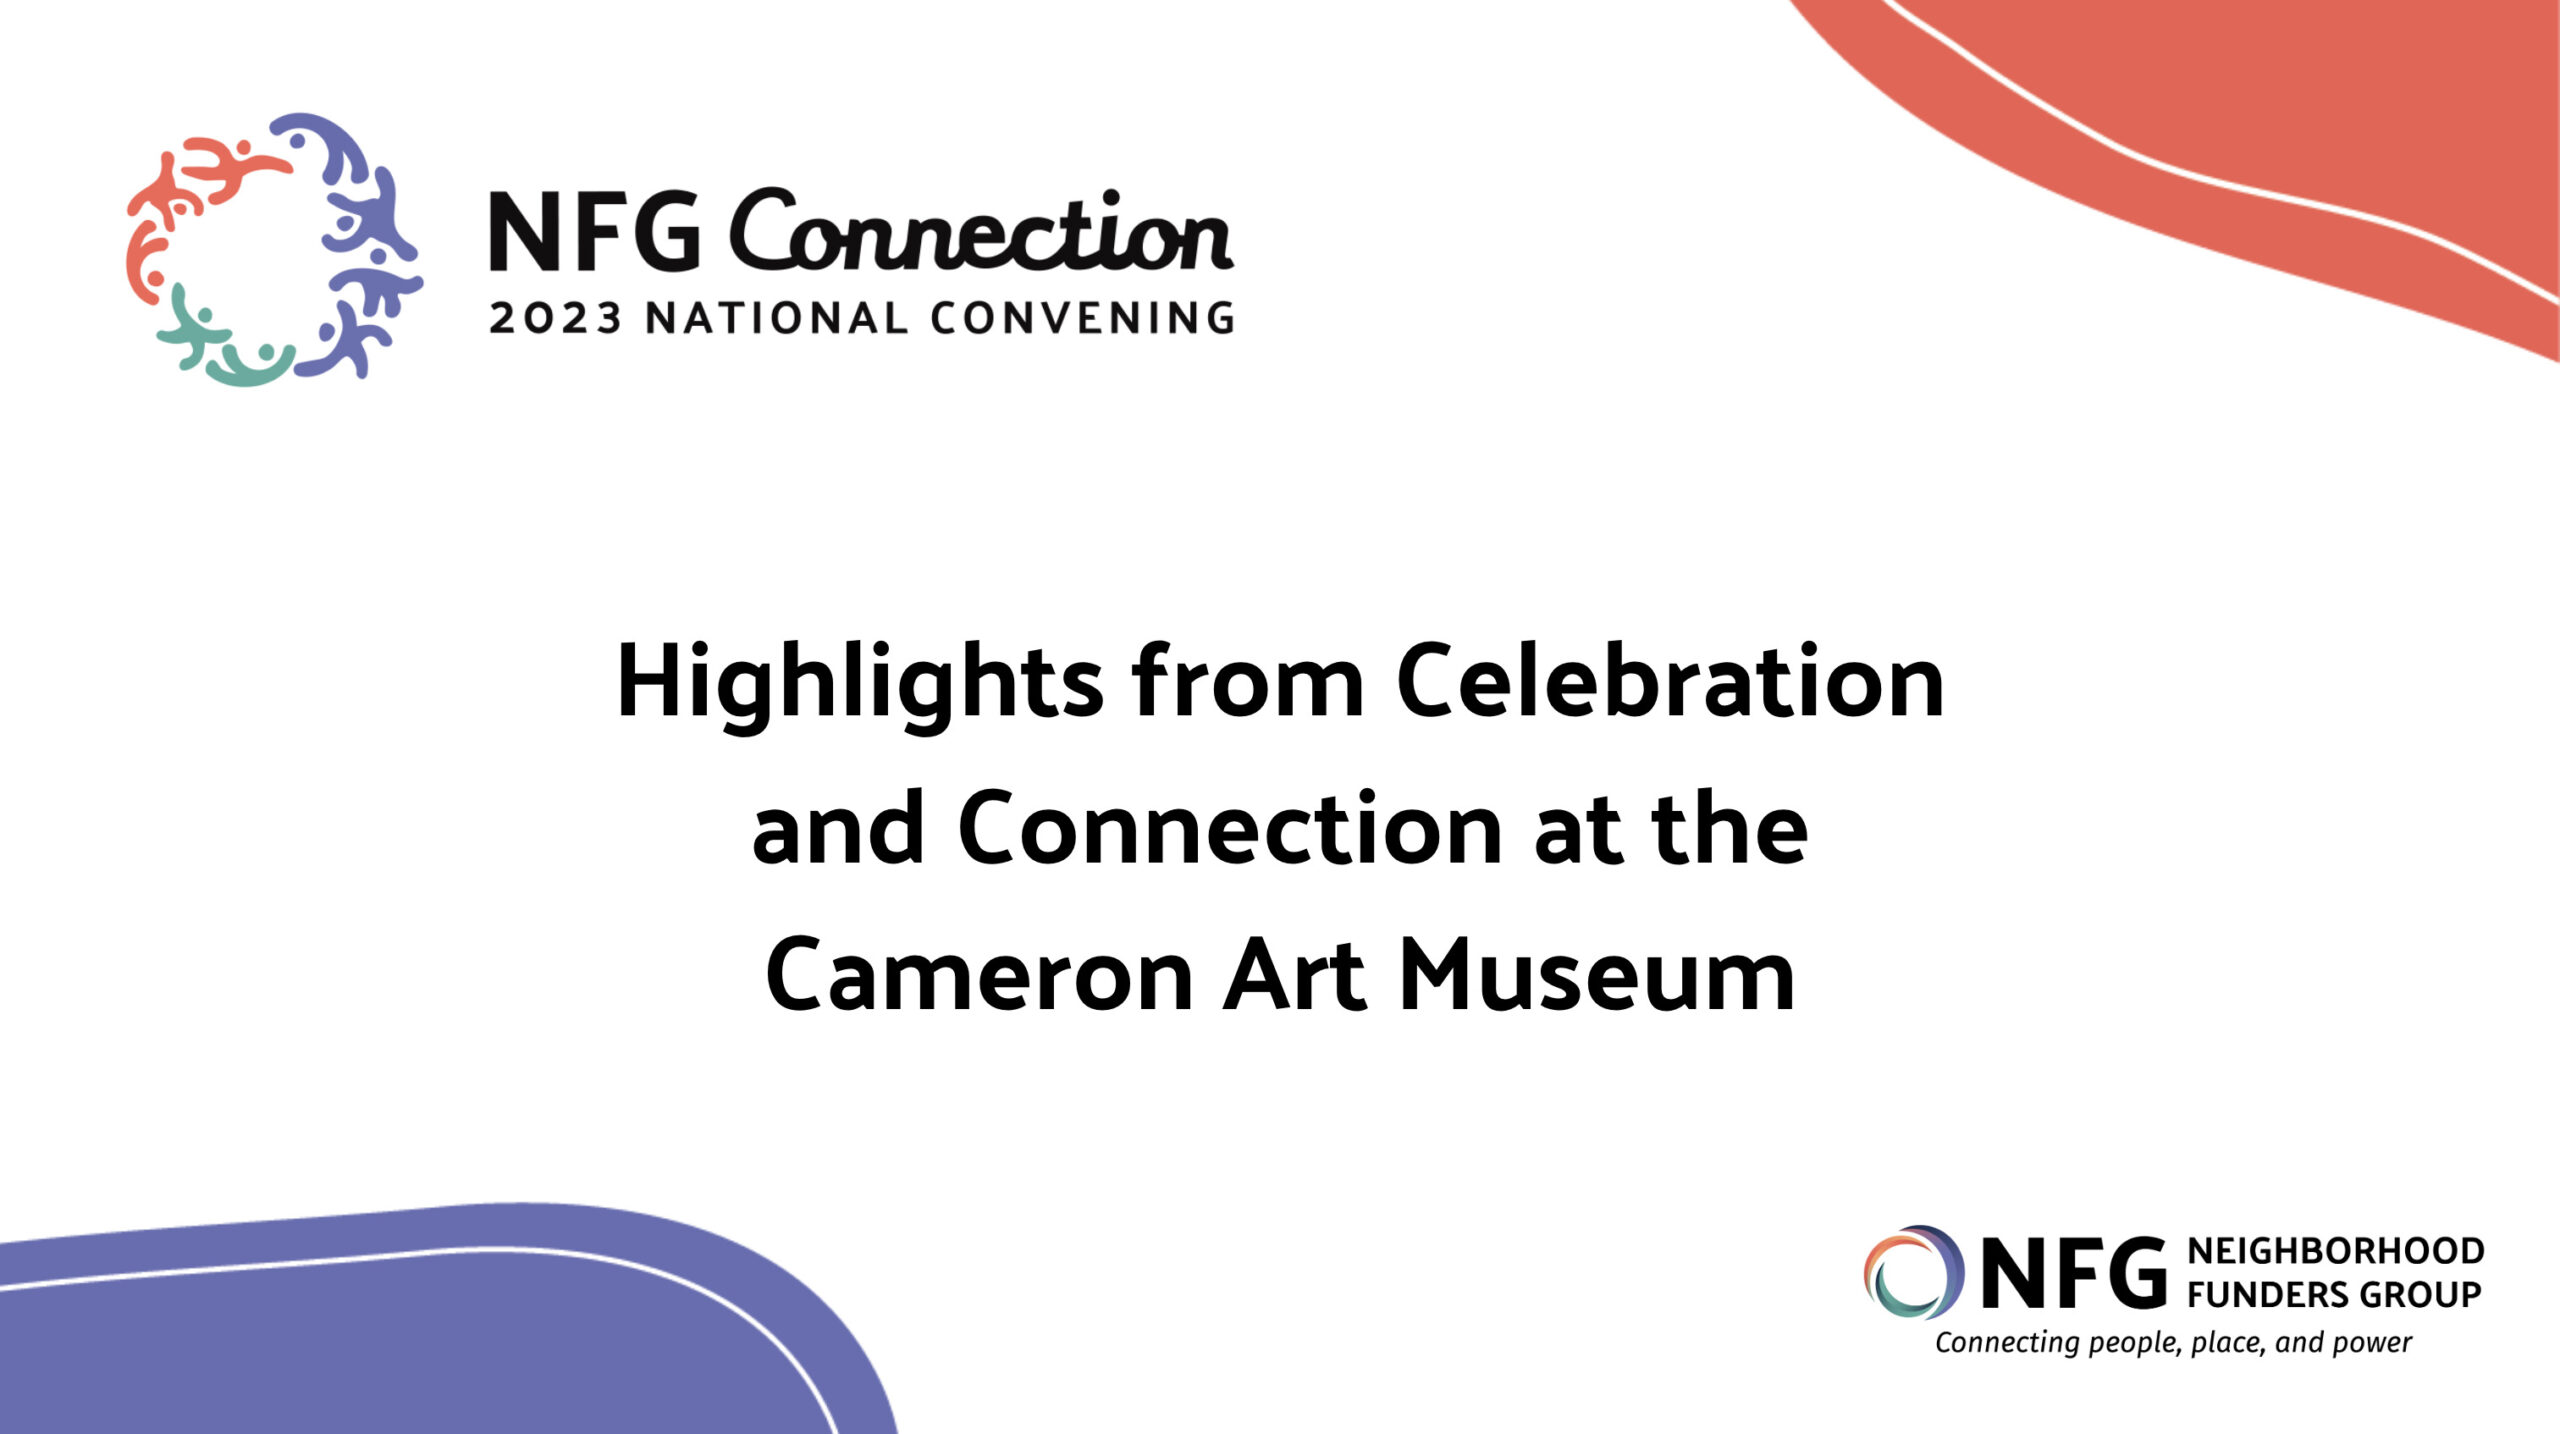 Title card for NFG's 2023 National Convening "Highlights from Celebration and Connection at the Cameron Art Museum"